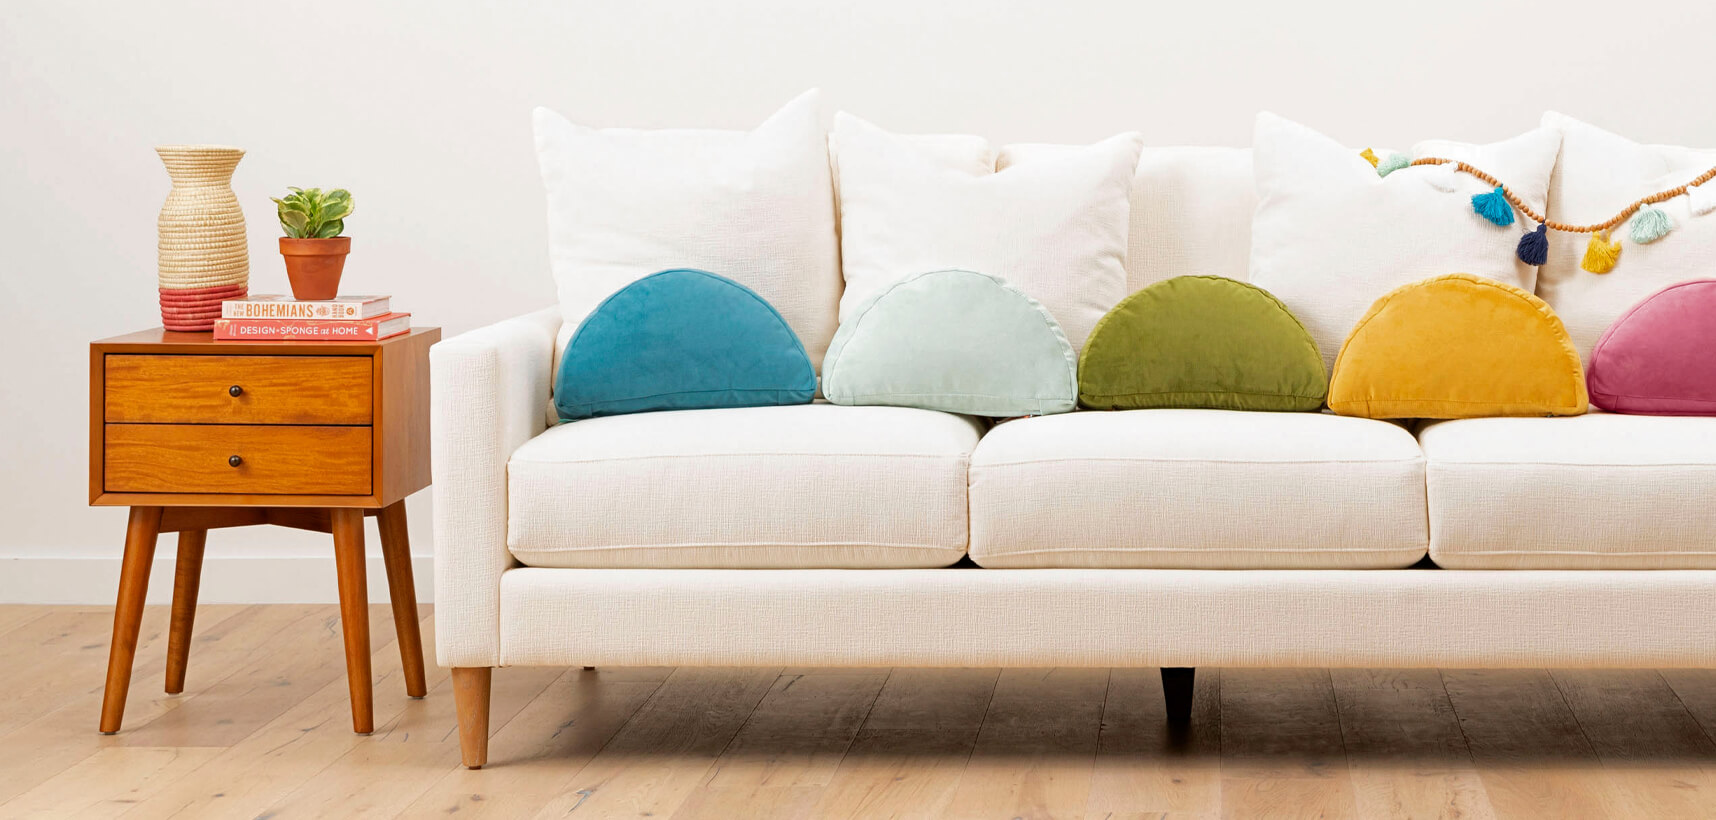 Sofa with colorful pillow